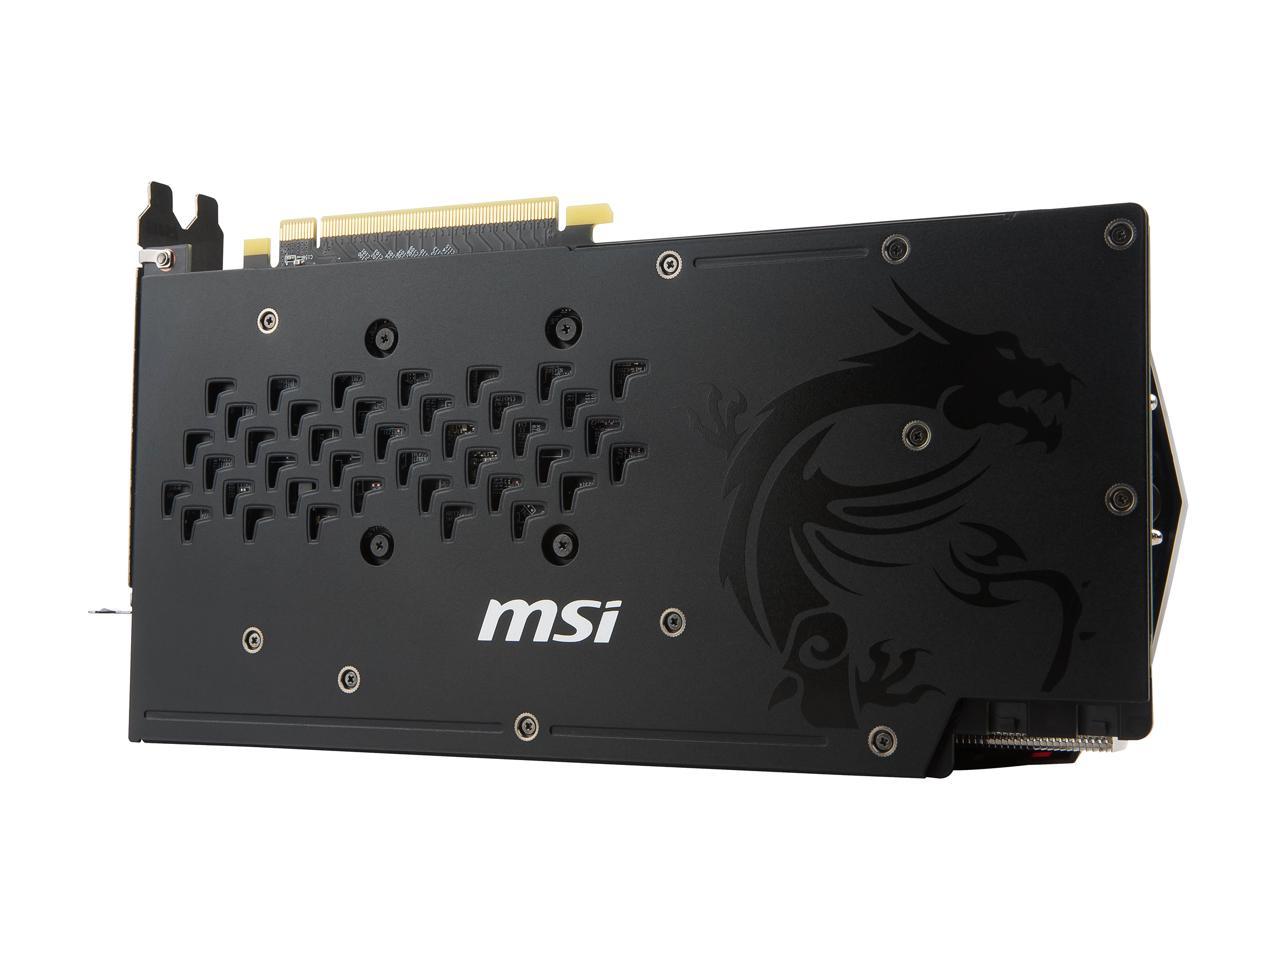 Used - Like New: MSI Radeon RX 580 Video Card RX 580 GAMING X+ 8G 